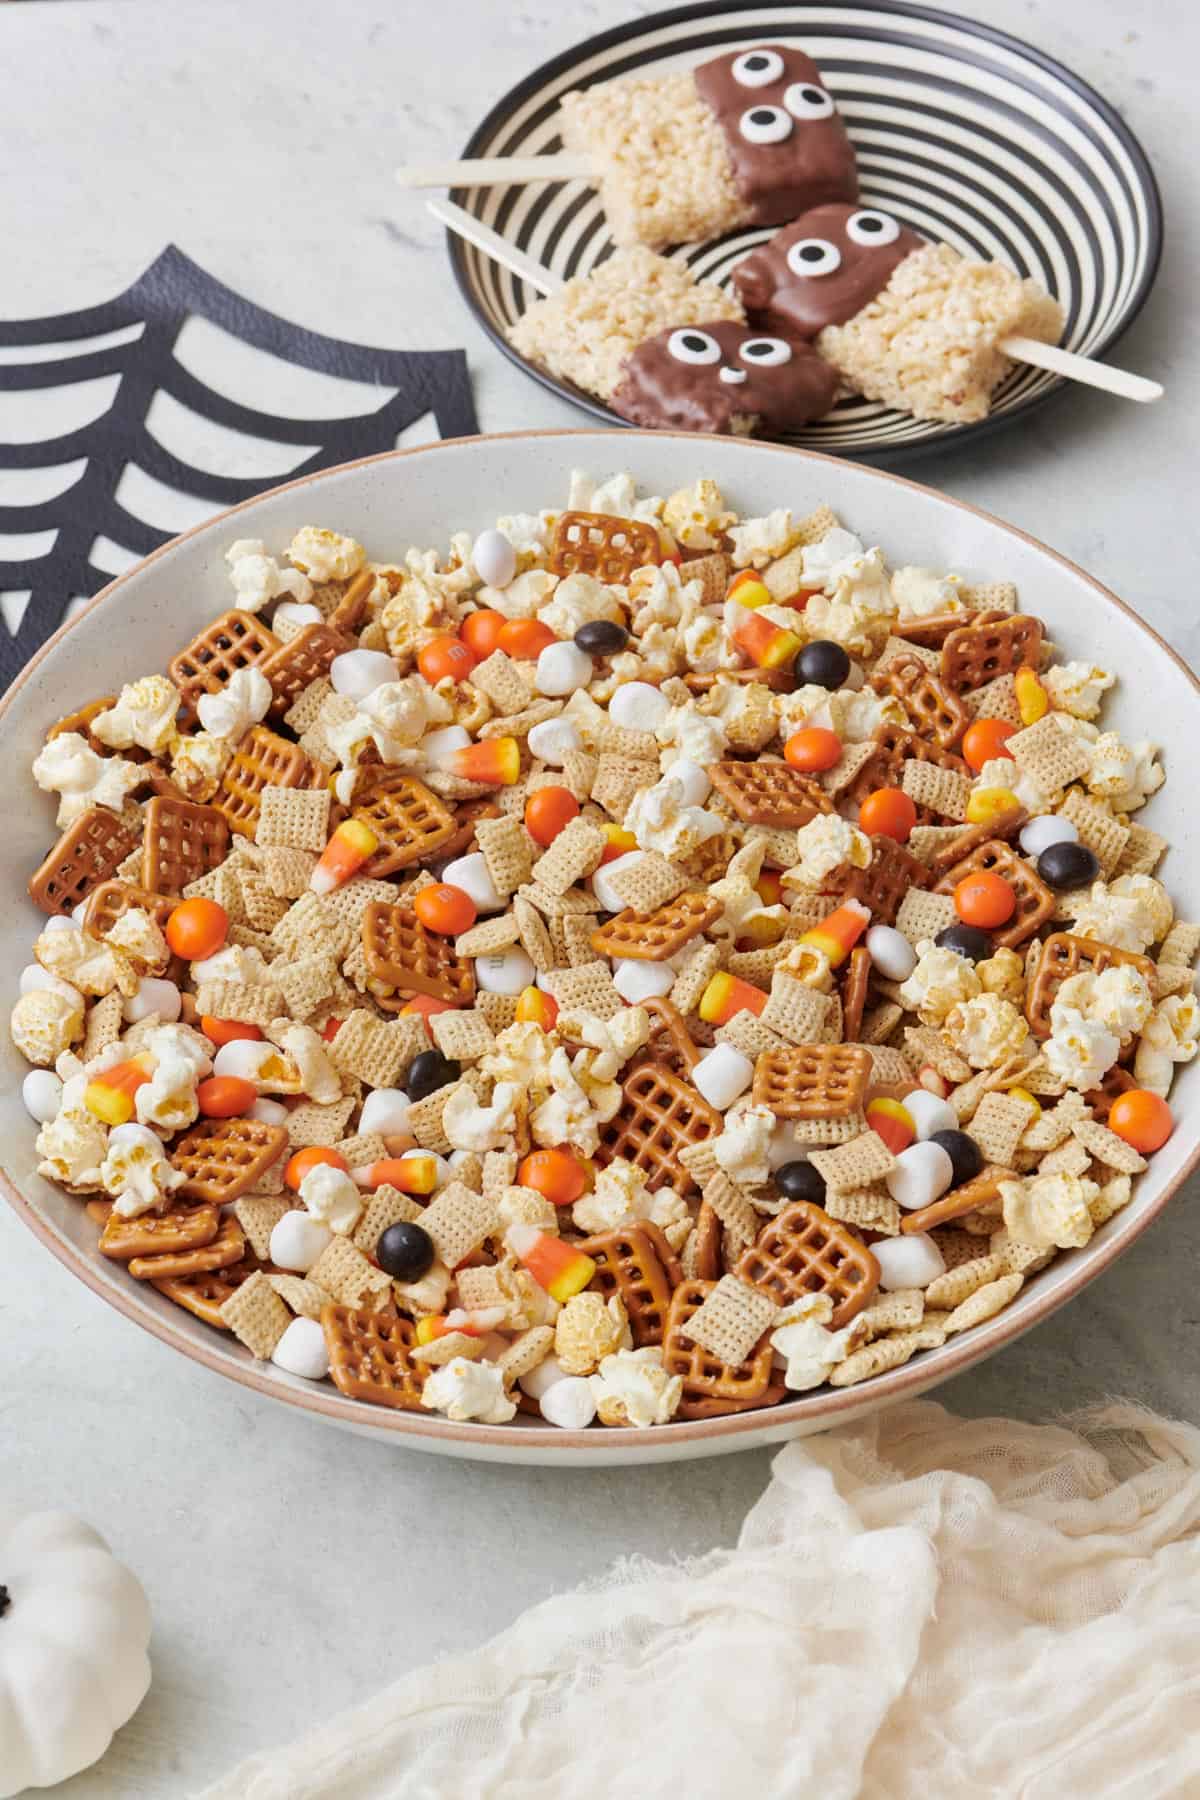 Monster munch trail mix with mini marshmallows, pretzels, popcorn and candy pieces in a bowl with monster rice krispies nearby.